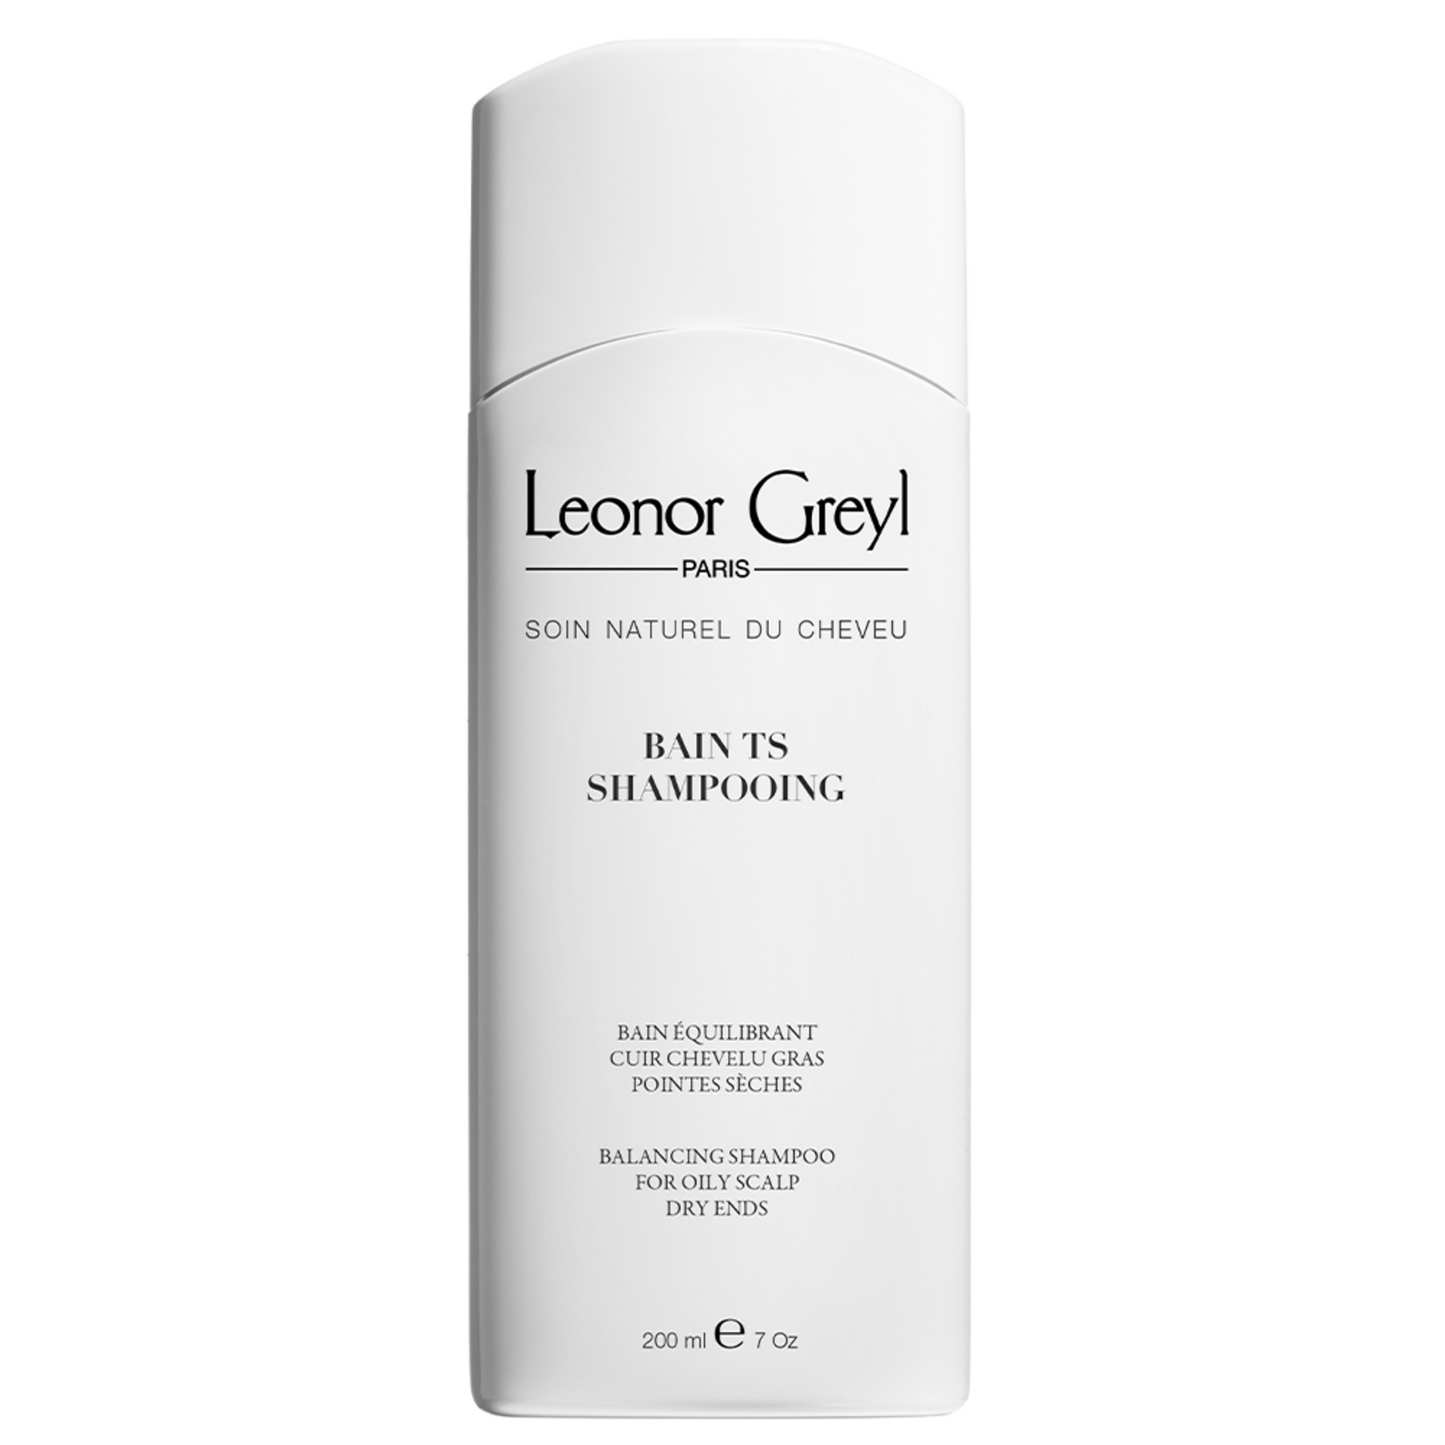 Leonor Greyl Bain TS Shampooing Balancing Treatment for Oily Scalps and Dry Ends